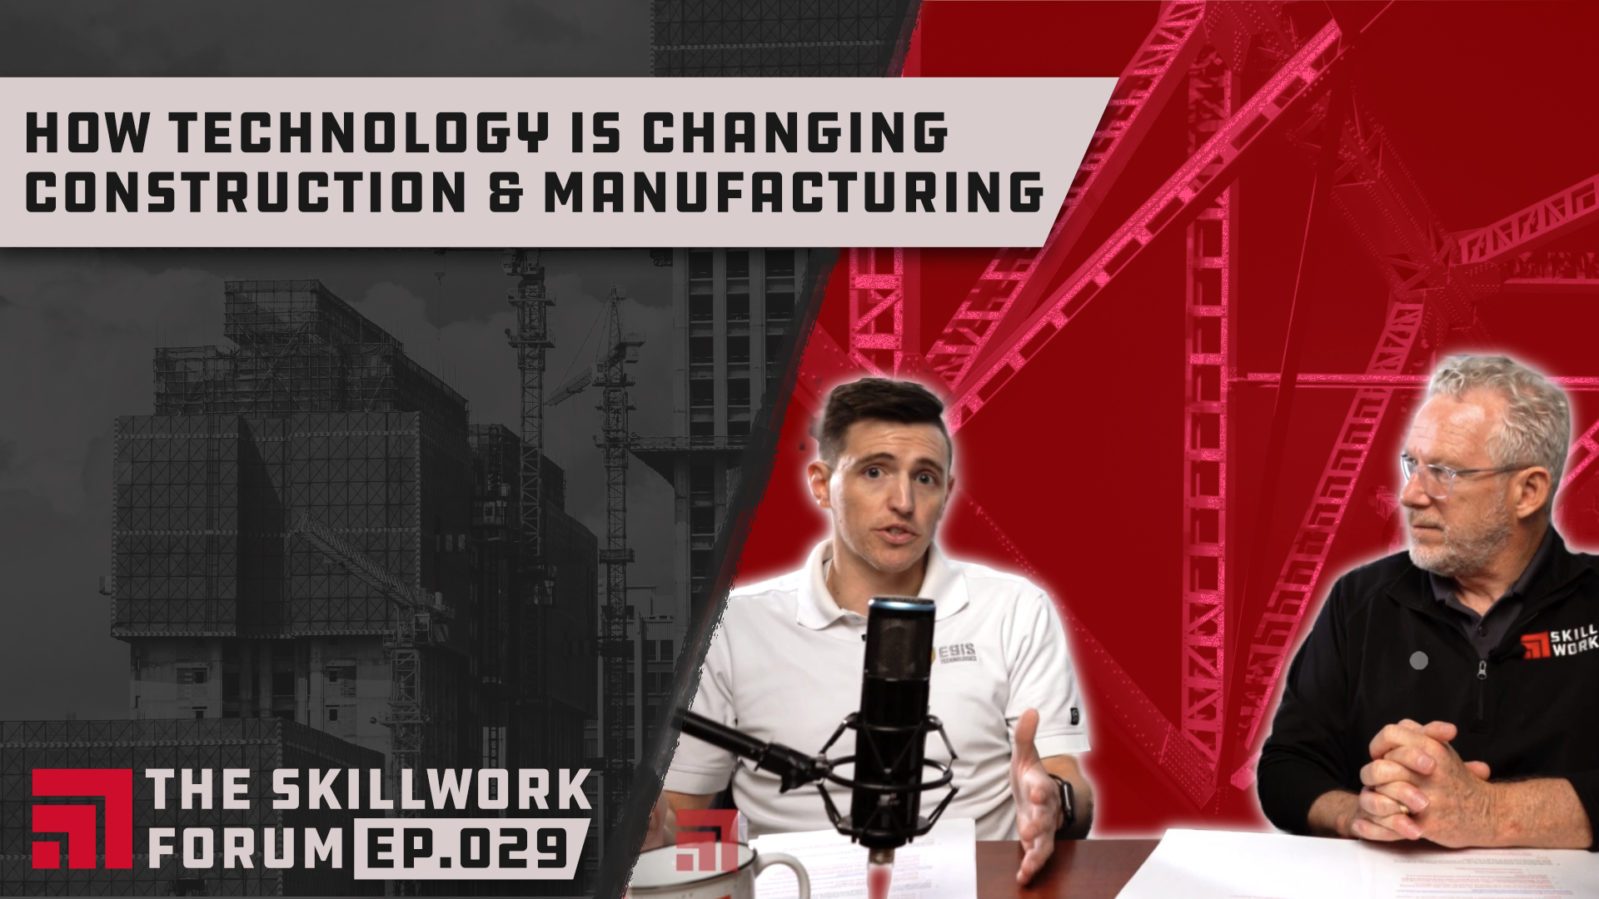 How Technology is Changing Construction & Manufacturing